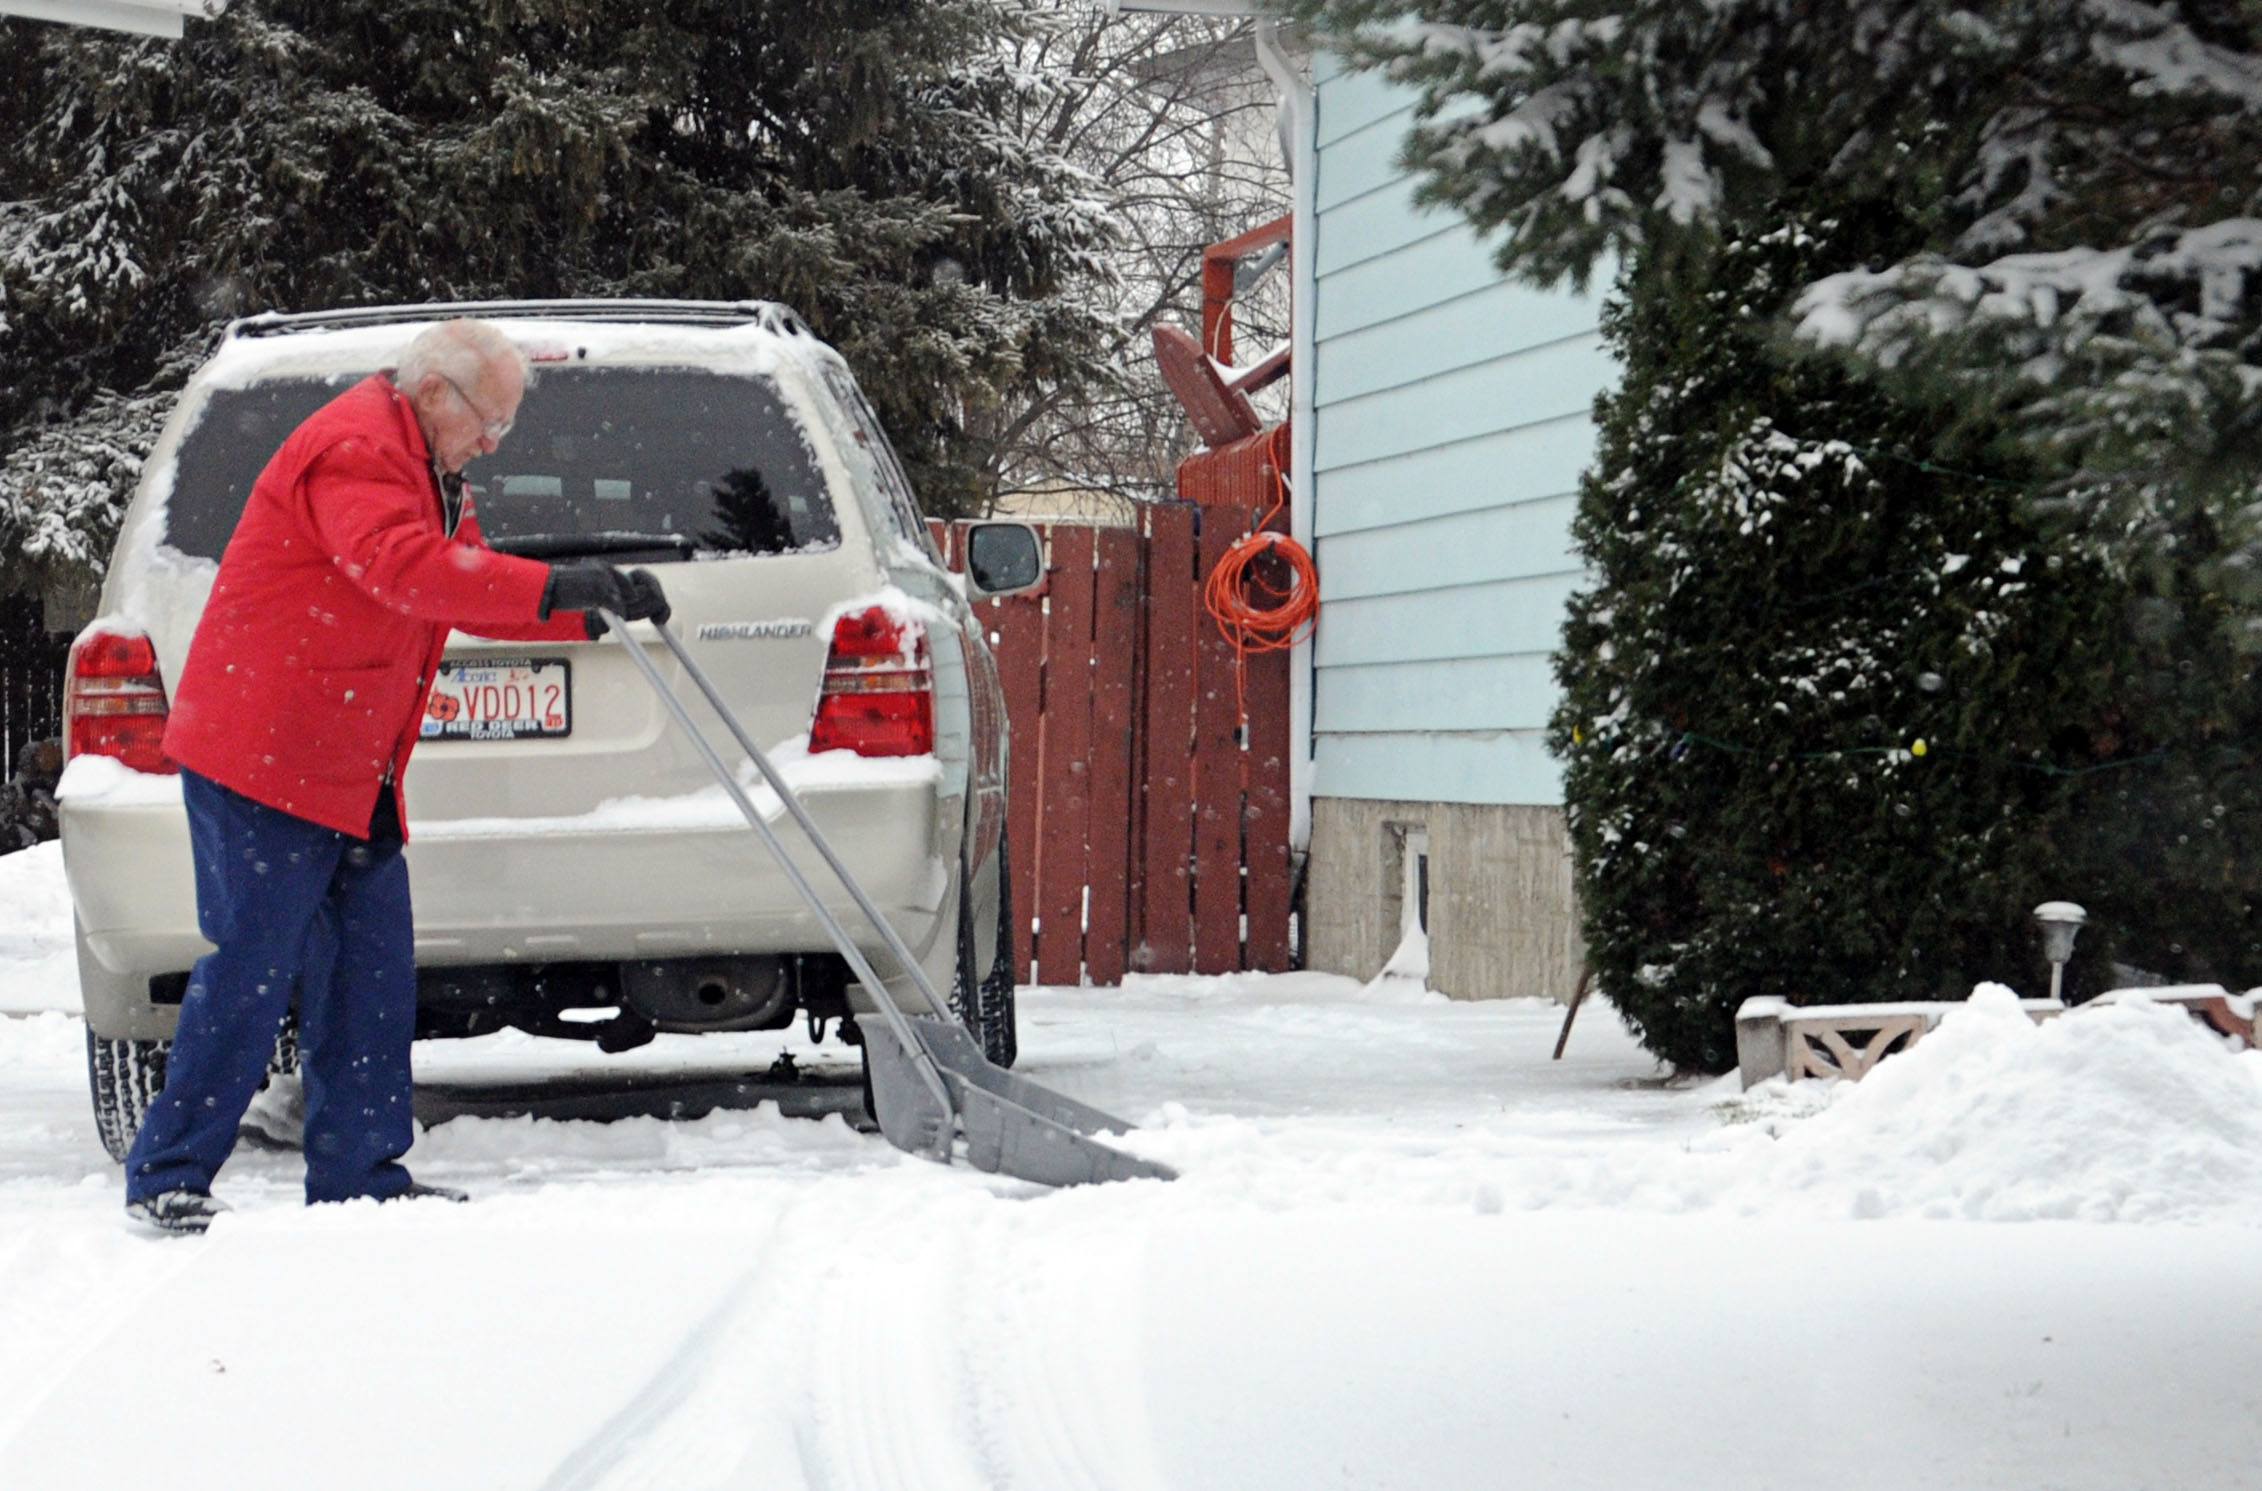 WELCOME WINTER – A local shovels the snow from his driveway after the first real snowfall of the season. Central Alberta was hit with the blast of winter late Monday night. Snow is expected to continue throughout the week.